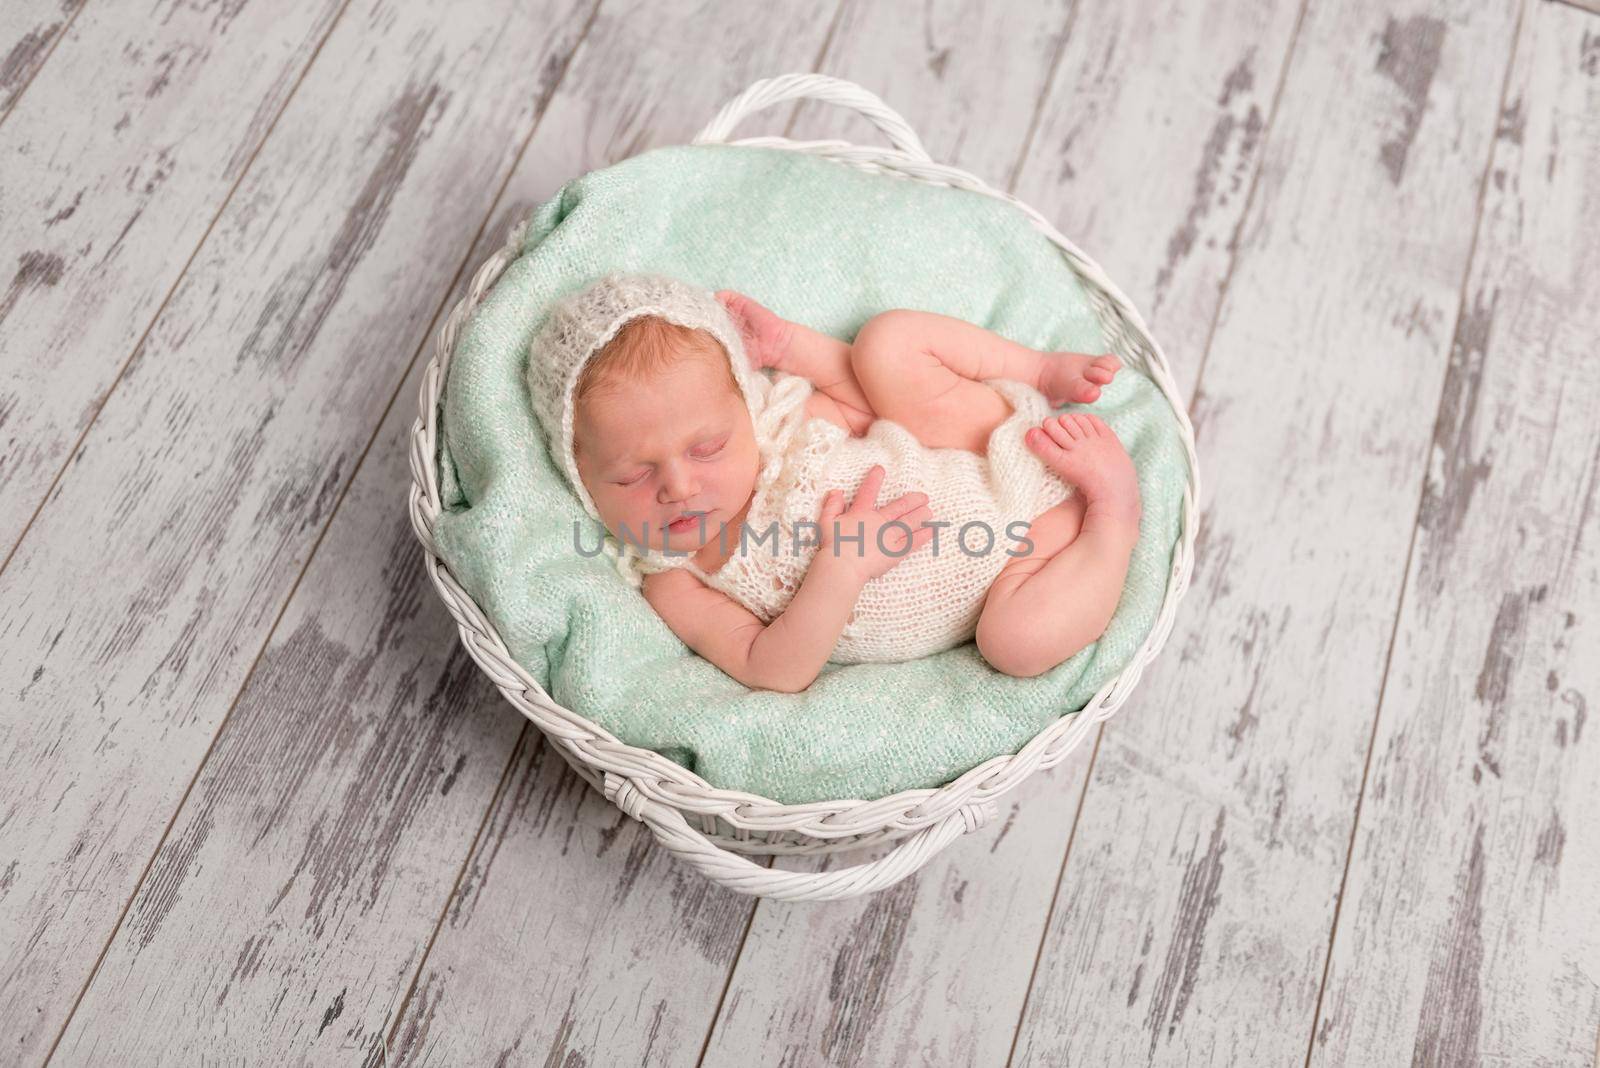 lovely newborn baby in hat and jumper sleeping in basket